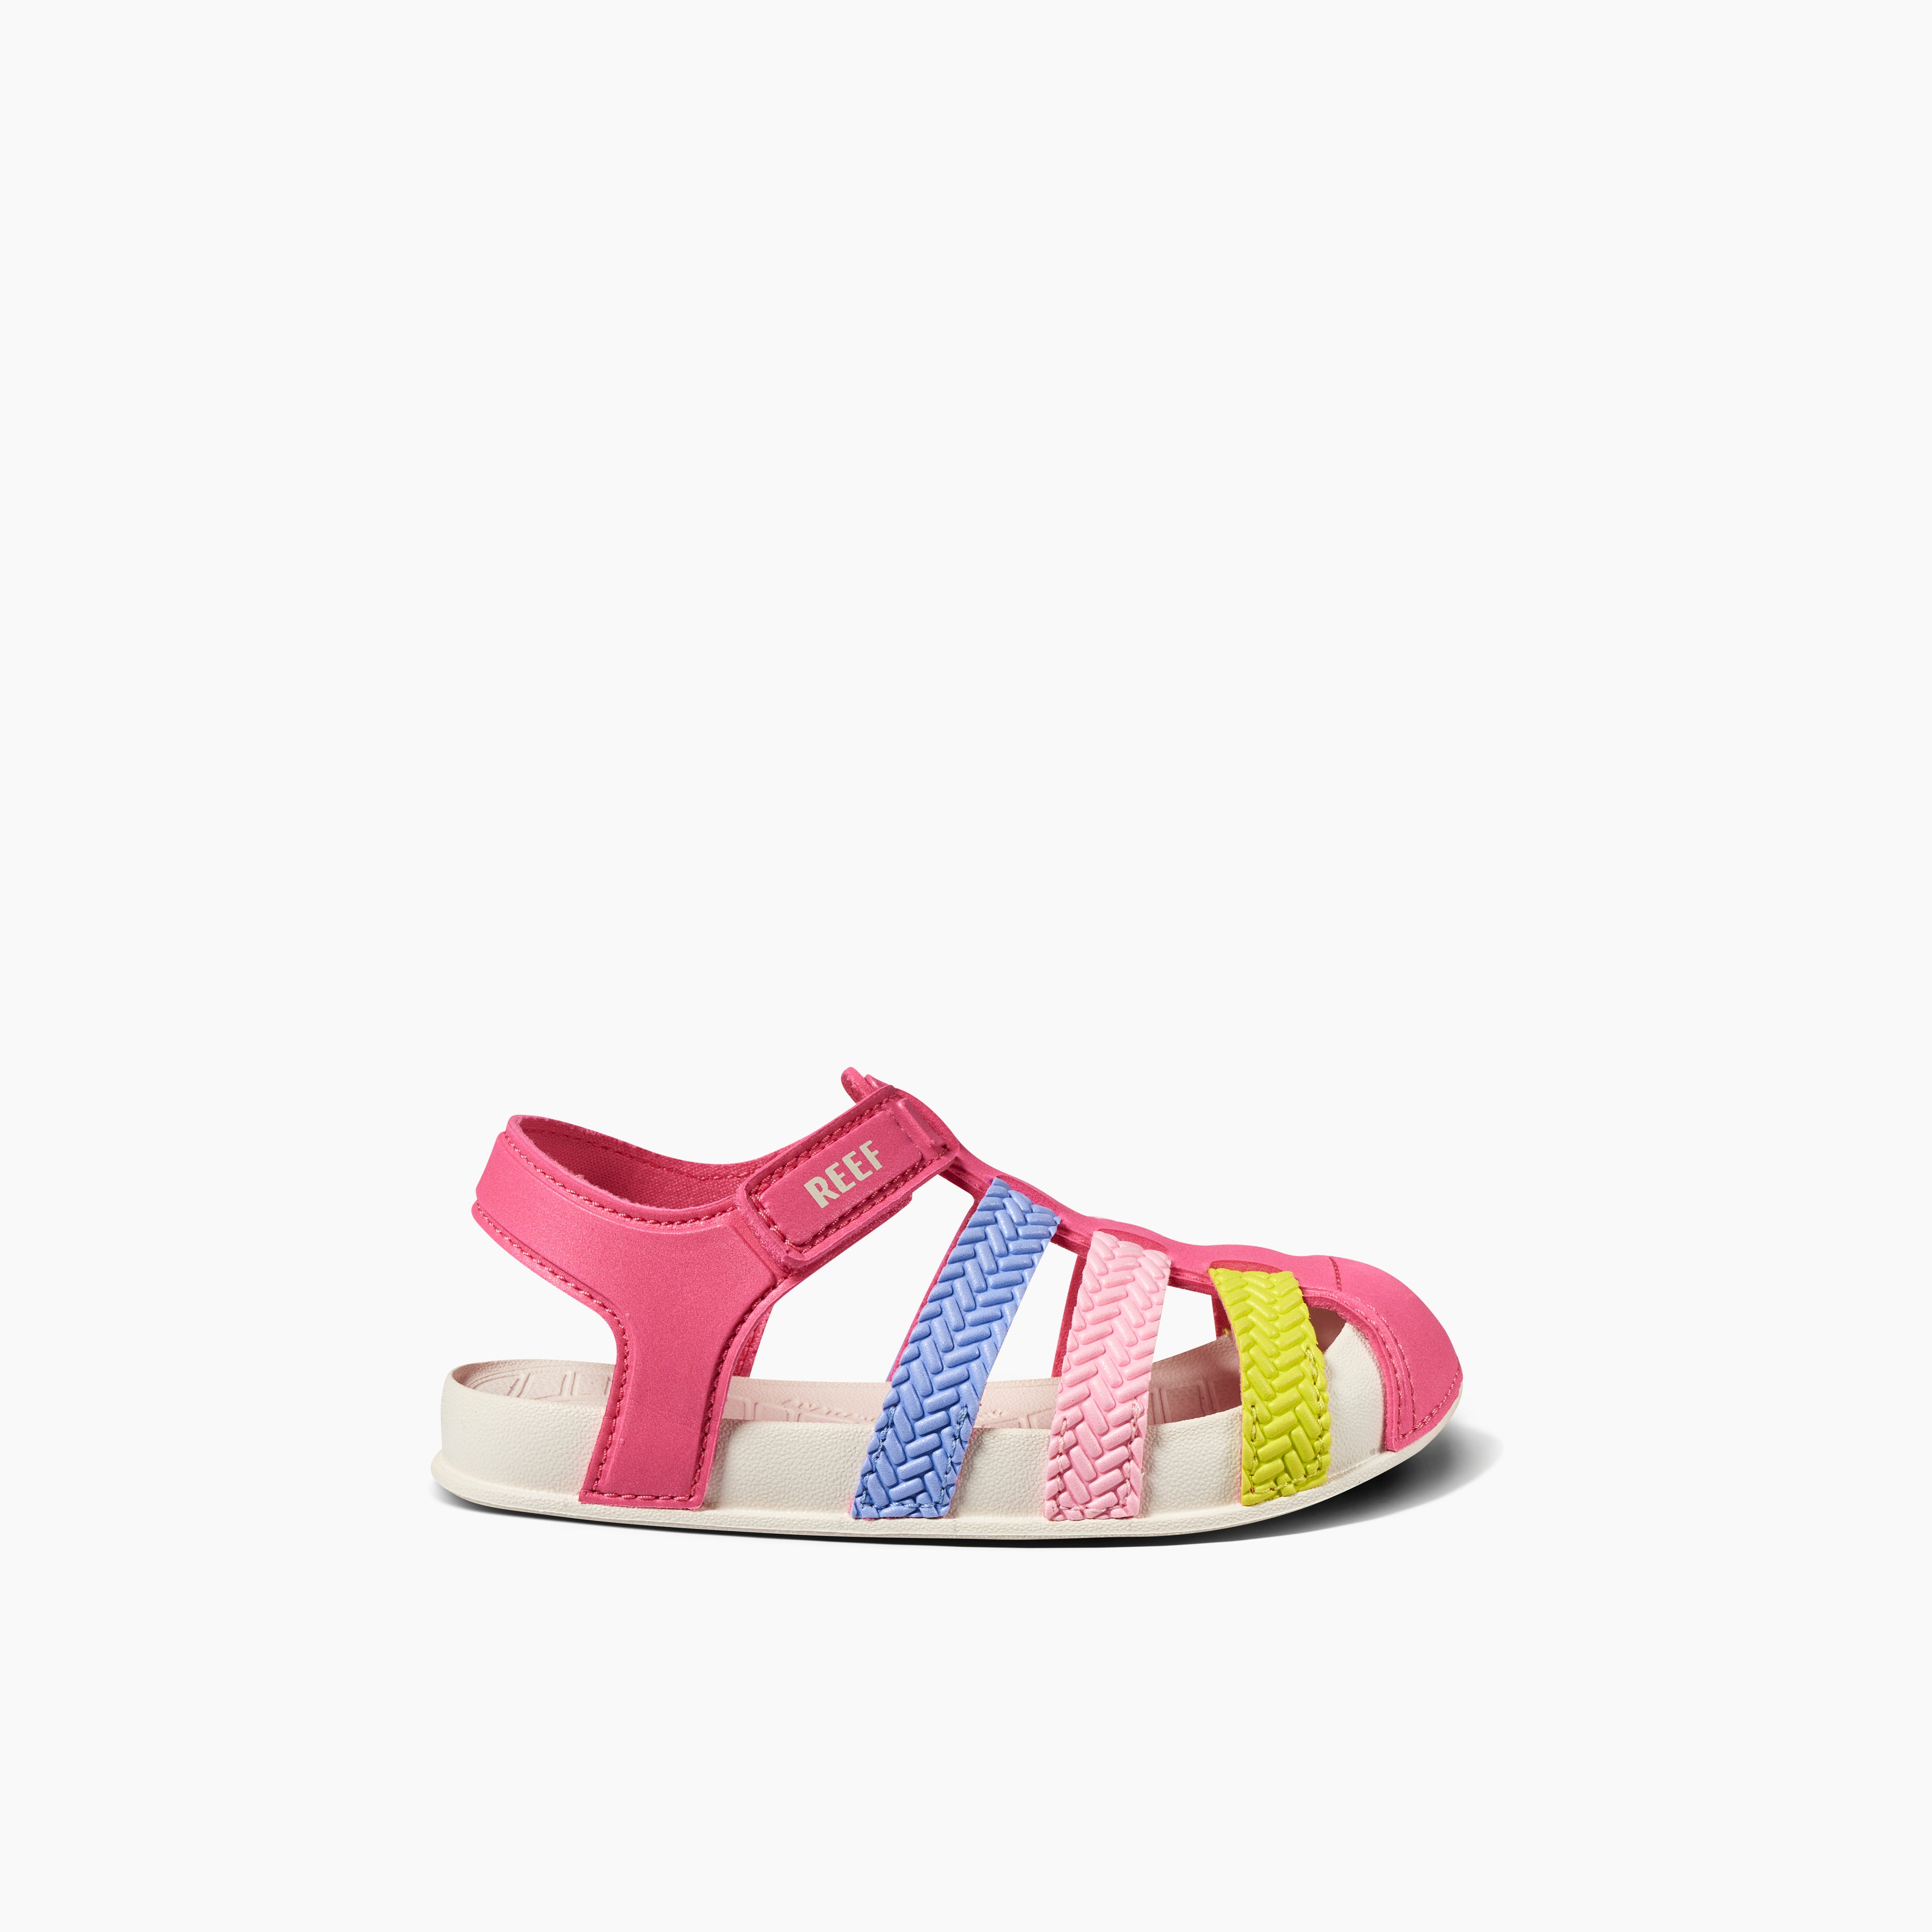 Girl's Kids Water Beachy Shoes in Multi side view